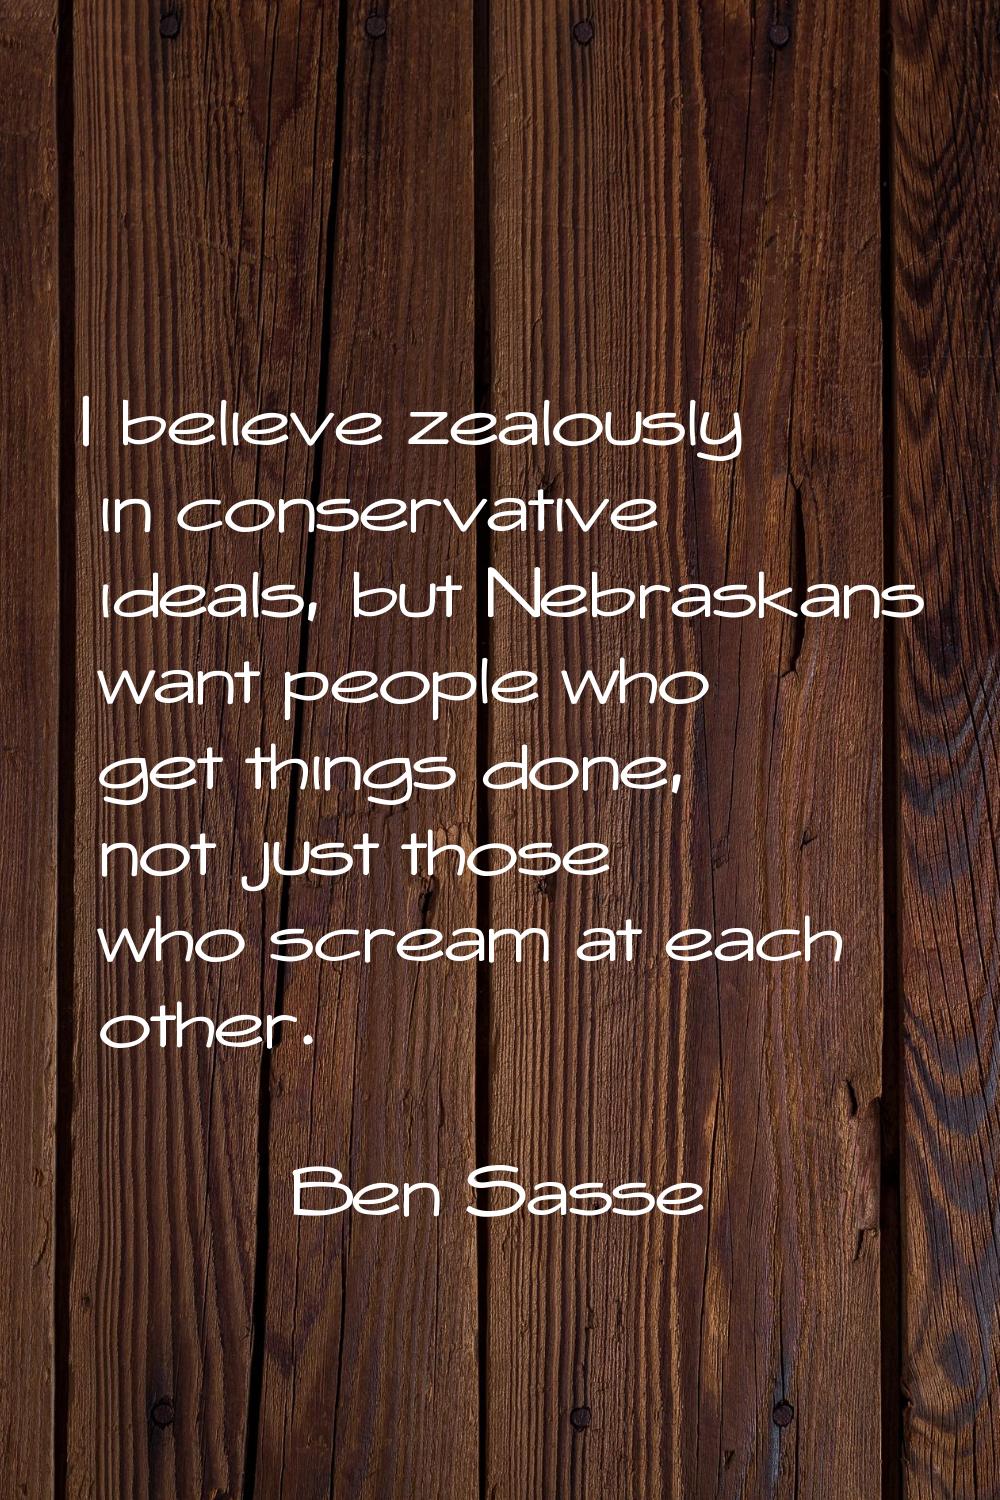 I believe zealously in conservative ideals, but Nebraskans want people who get things done, not jus